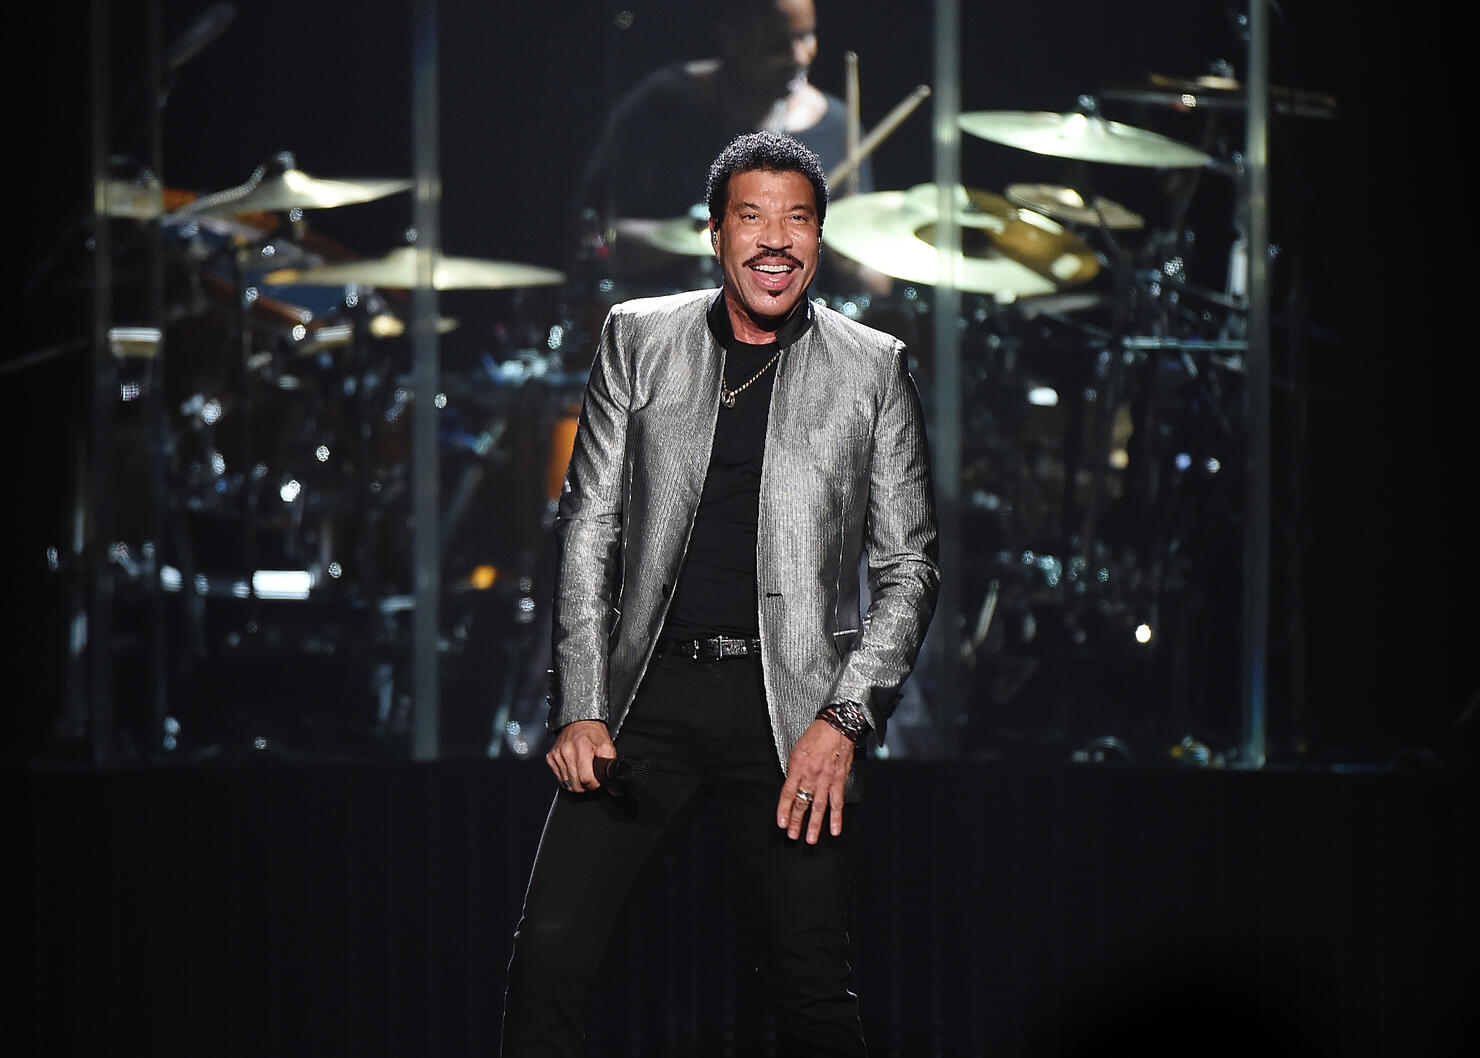 Lionel Richie With Very Special Guest Mariah Carey In Concert - New York, New York